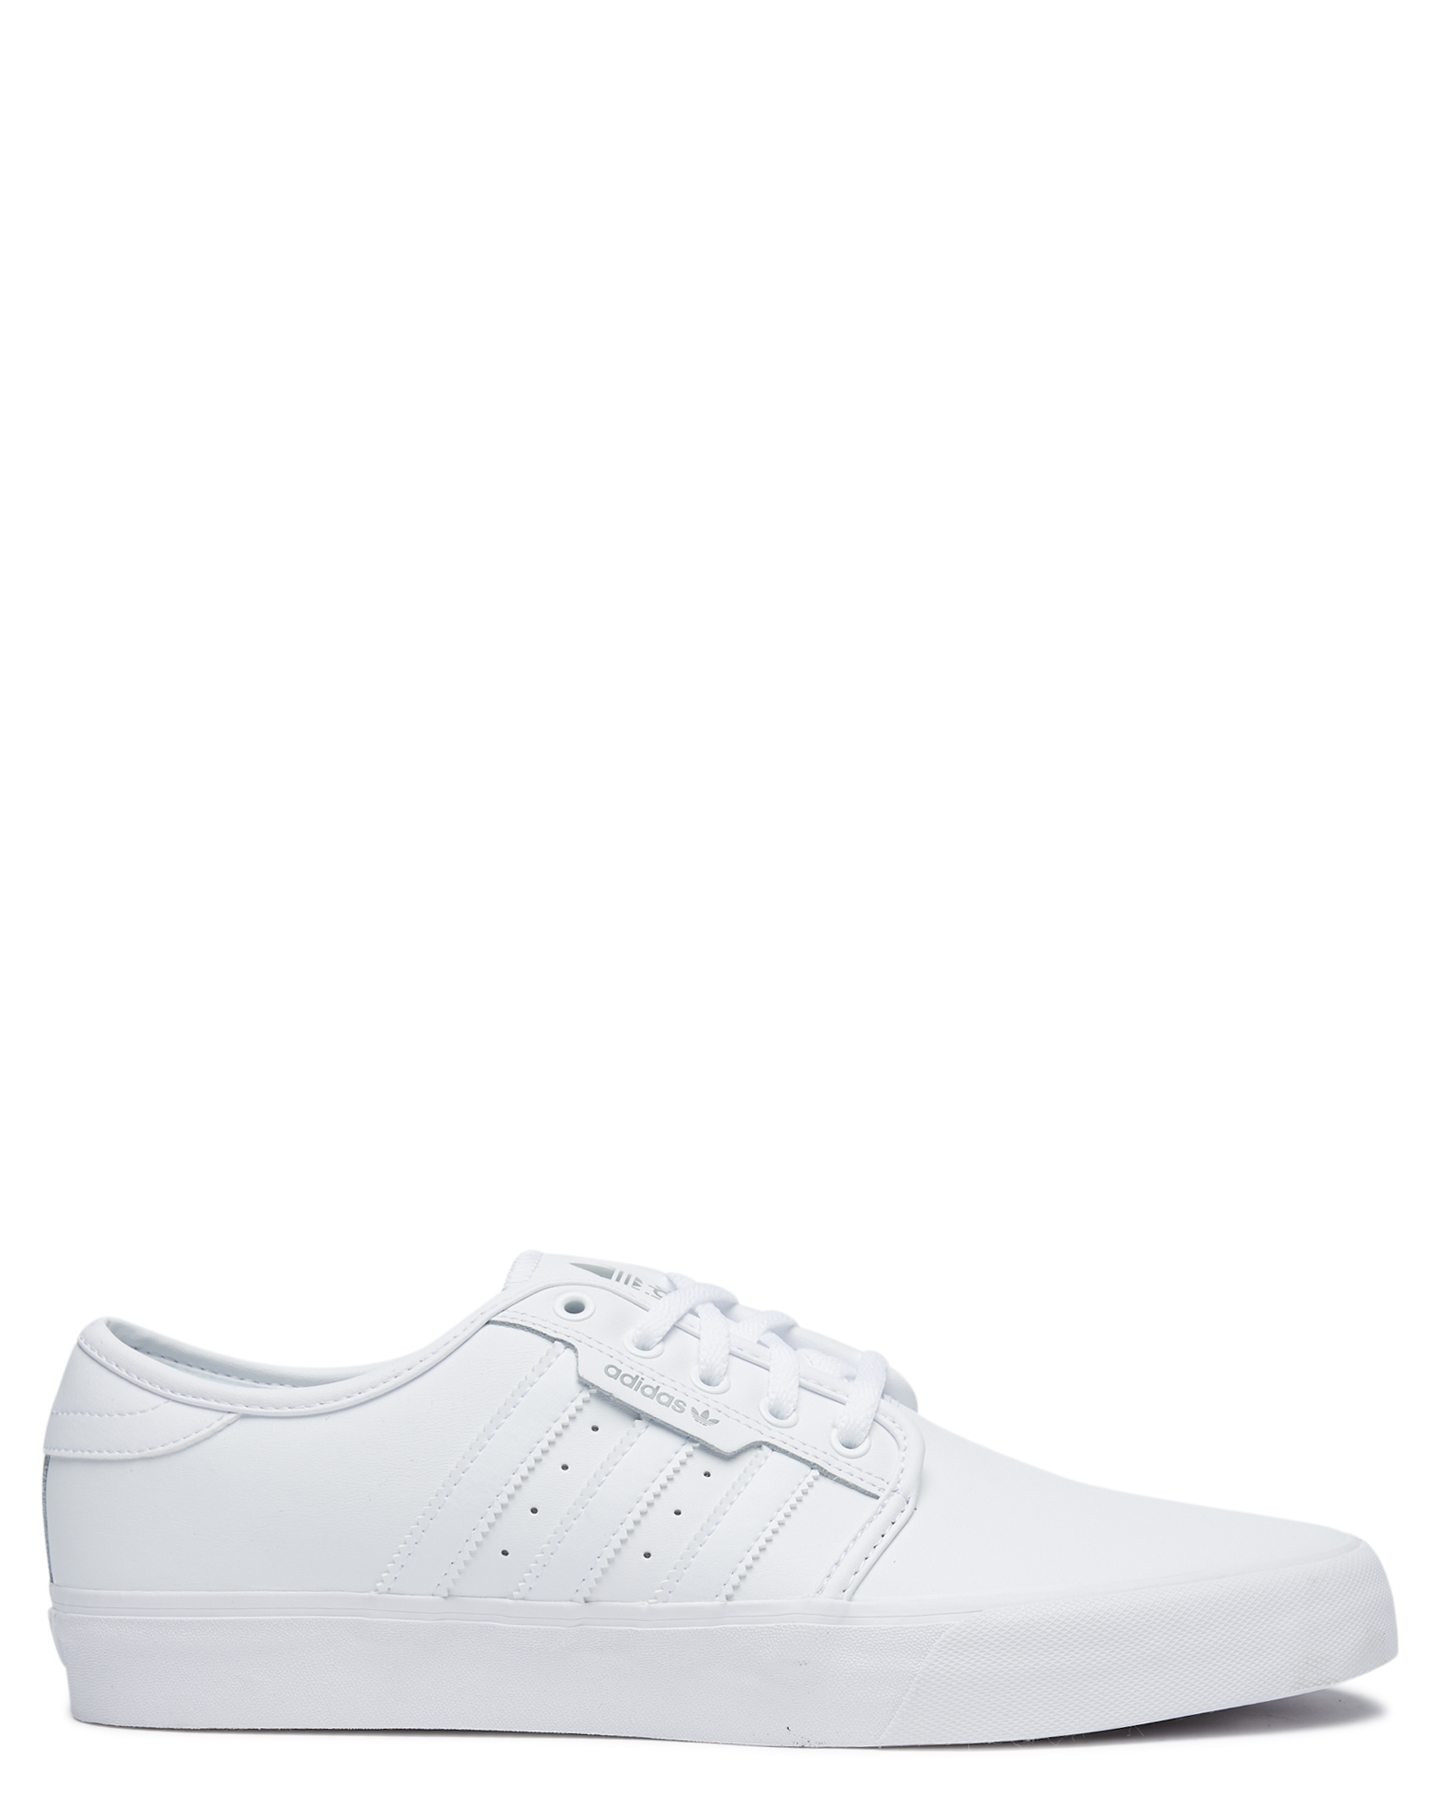 adidas shoes leather white